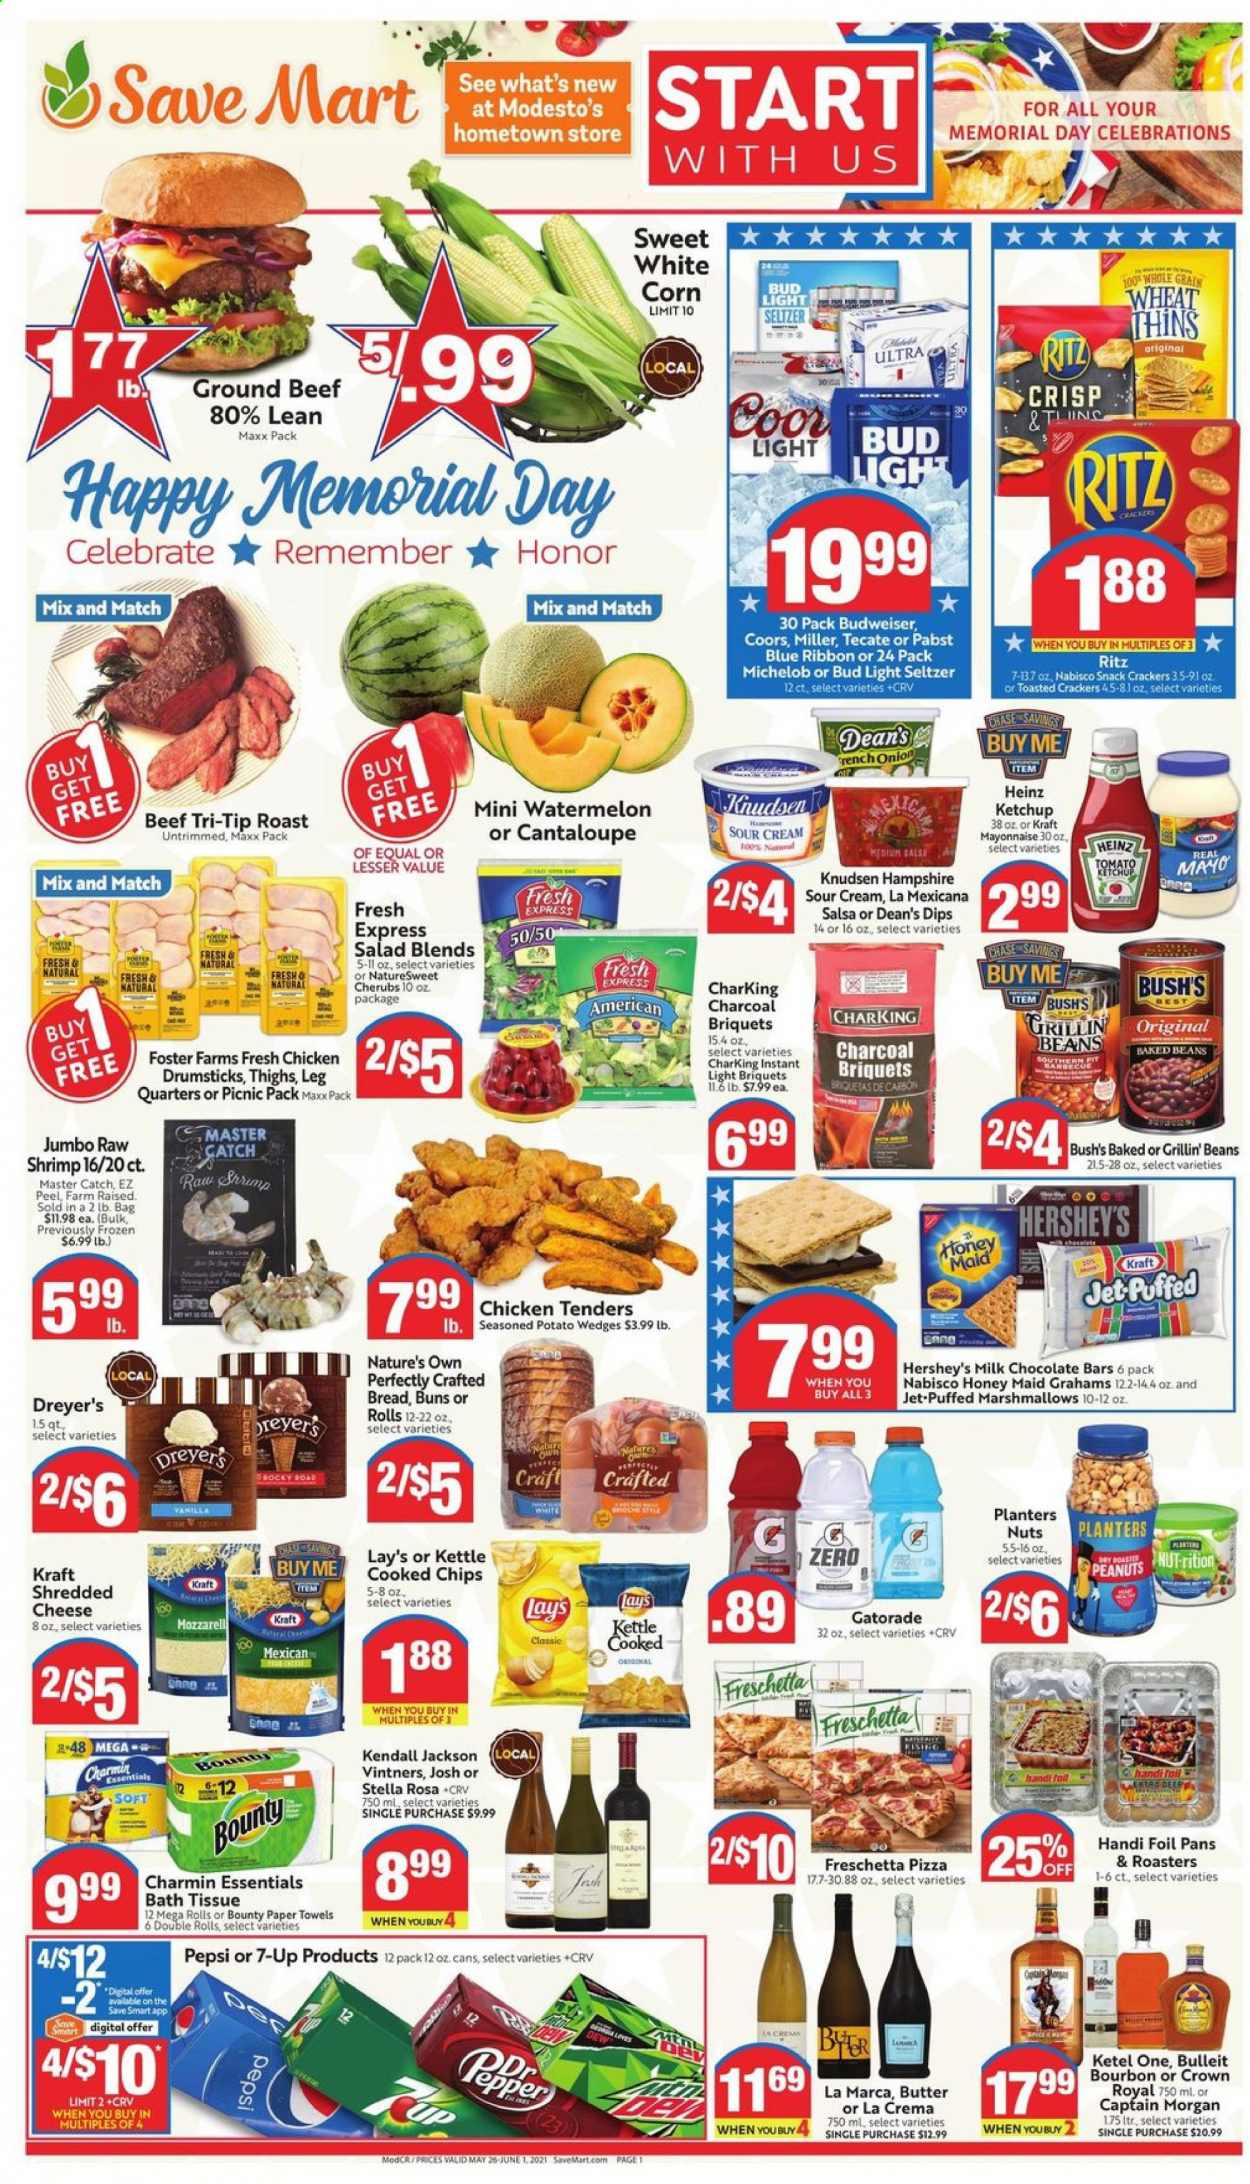 thumbnail - Save Mart Flyer - 05/26/2021 - 06/01/2021 - Sales products - Budweiser, Coors, Michelob, buns, brioche, beans, corn, onion, salad, watermelon, chicken tenders, beef meat, ground beef, shrimps, pizza, Kraft®, shredded cheese, butter, sour cream, mayonnaise, Hershey's, potato wedges, marshmallows, milk chocolate, snack, Bounty, Celebration, crackers, RITZ, chocolate bar, Lay’s, Thins, Heinz, baked beans, Honey Maid, ketchup, salsa, peanuts, Planters, Pepsi, 7UP, Gatorade, bourbon, Hard Seltzer, beer, Bud Light, Miller, Pabst Blue Ribbon, Jet, Nature's Own. Page 1.